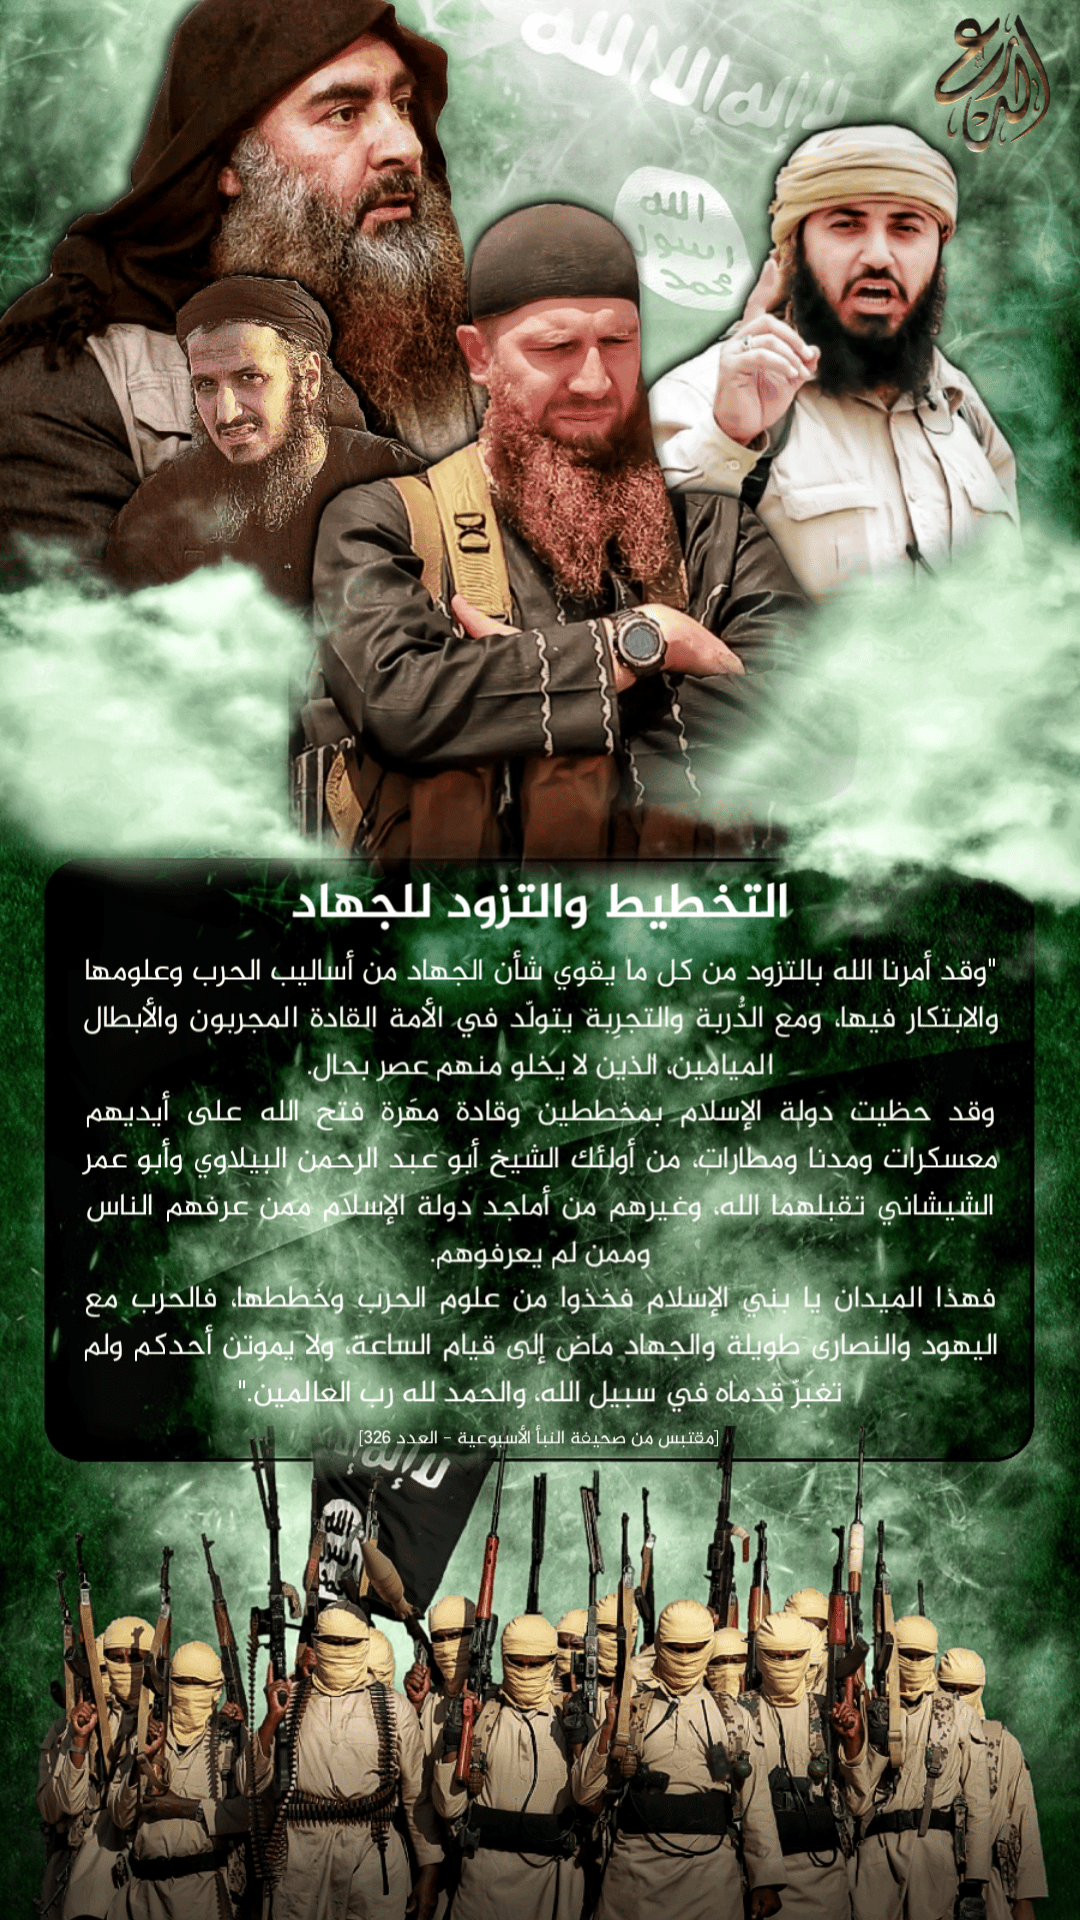 (Poster) al-Deraa al-Sunni (Unofficial Islamic State): "Planning and Supplying Oneself with Jihad" - 28 February 2022